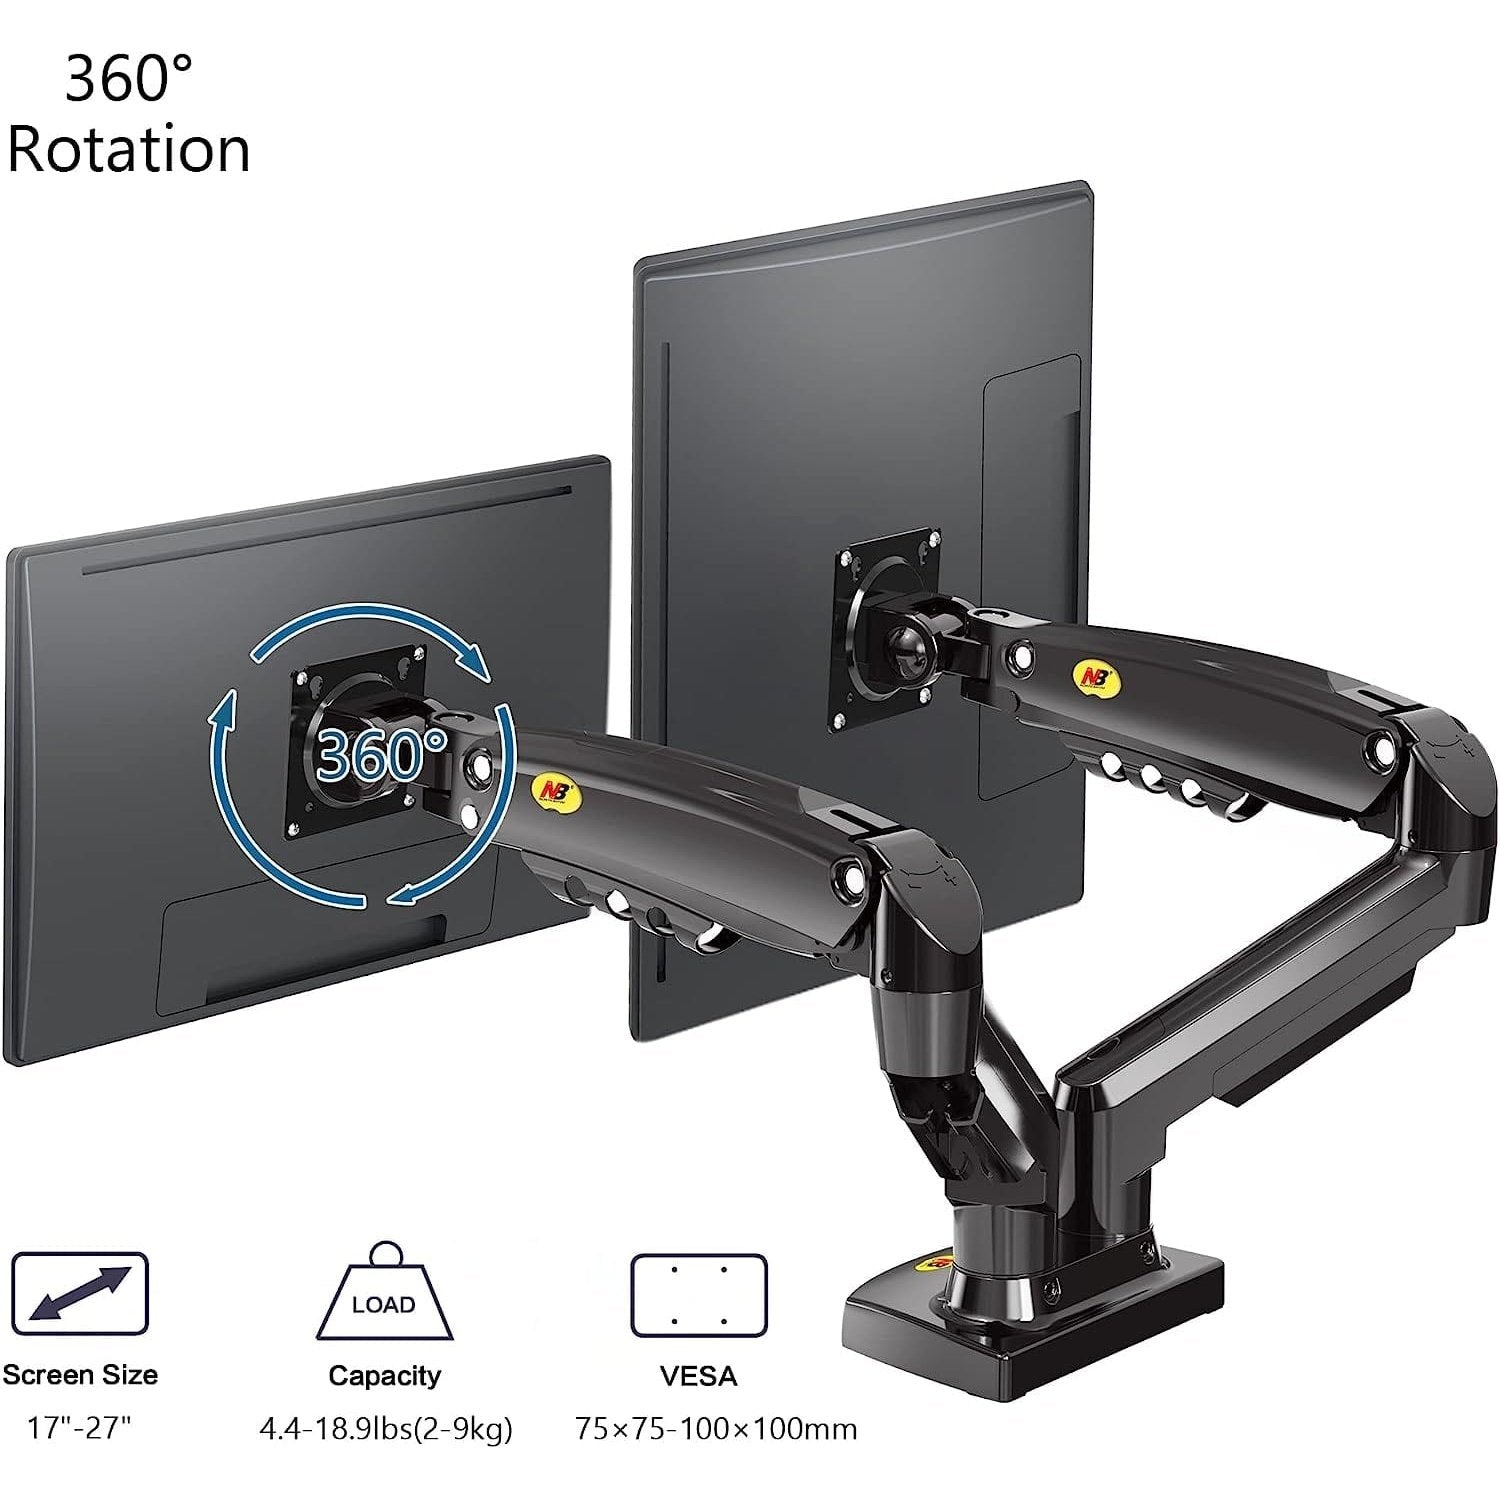 NB North Bayou Dual Monitor Desk Mount Stand - F160 | Supply Master Accra, Ghana Home Accessories Buy Tools hardware Building materials